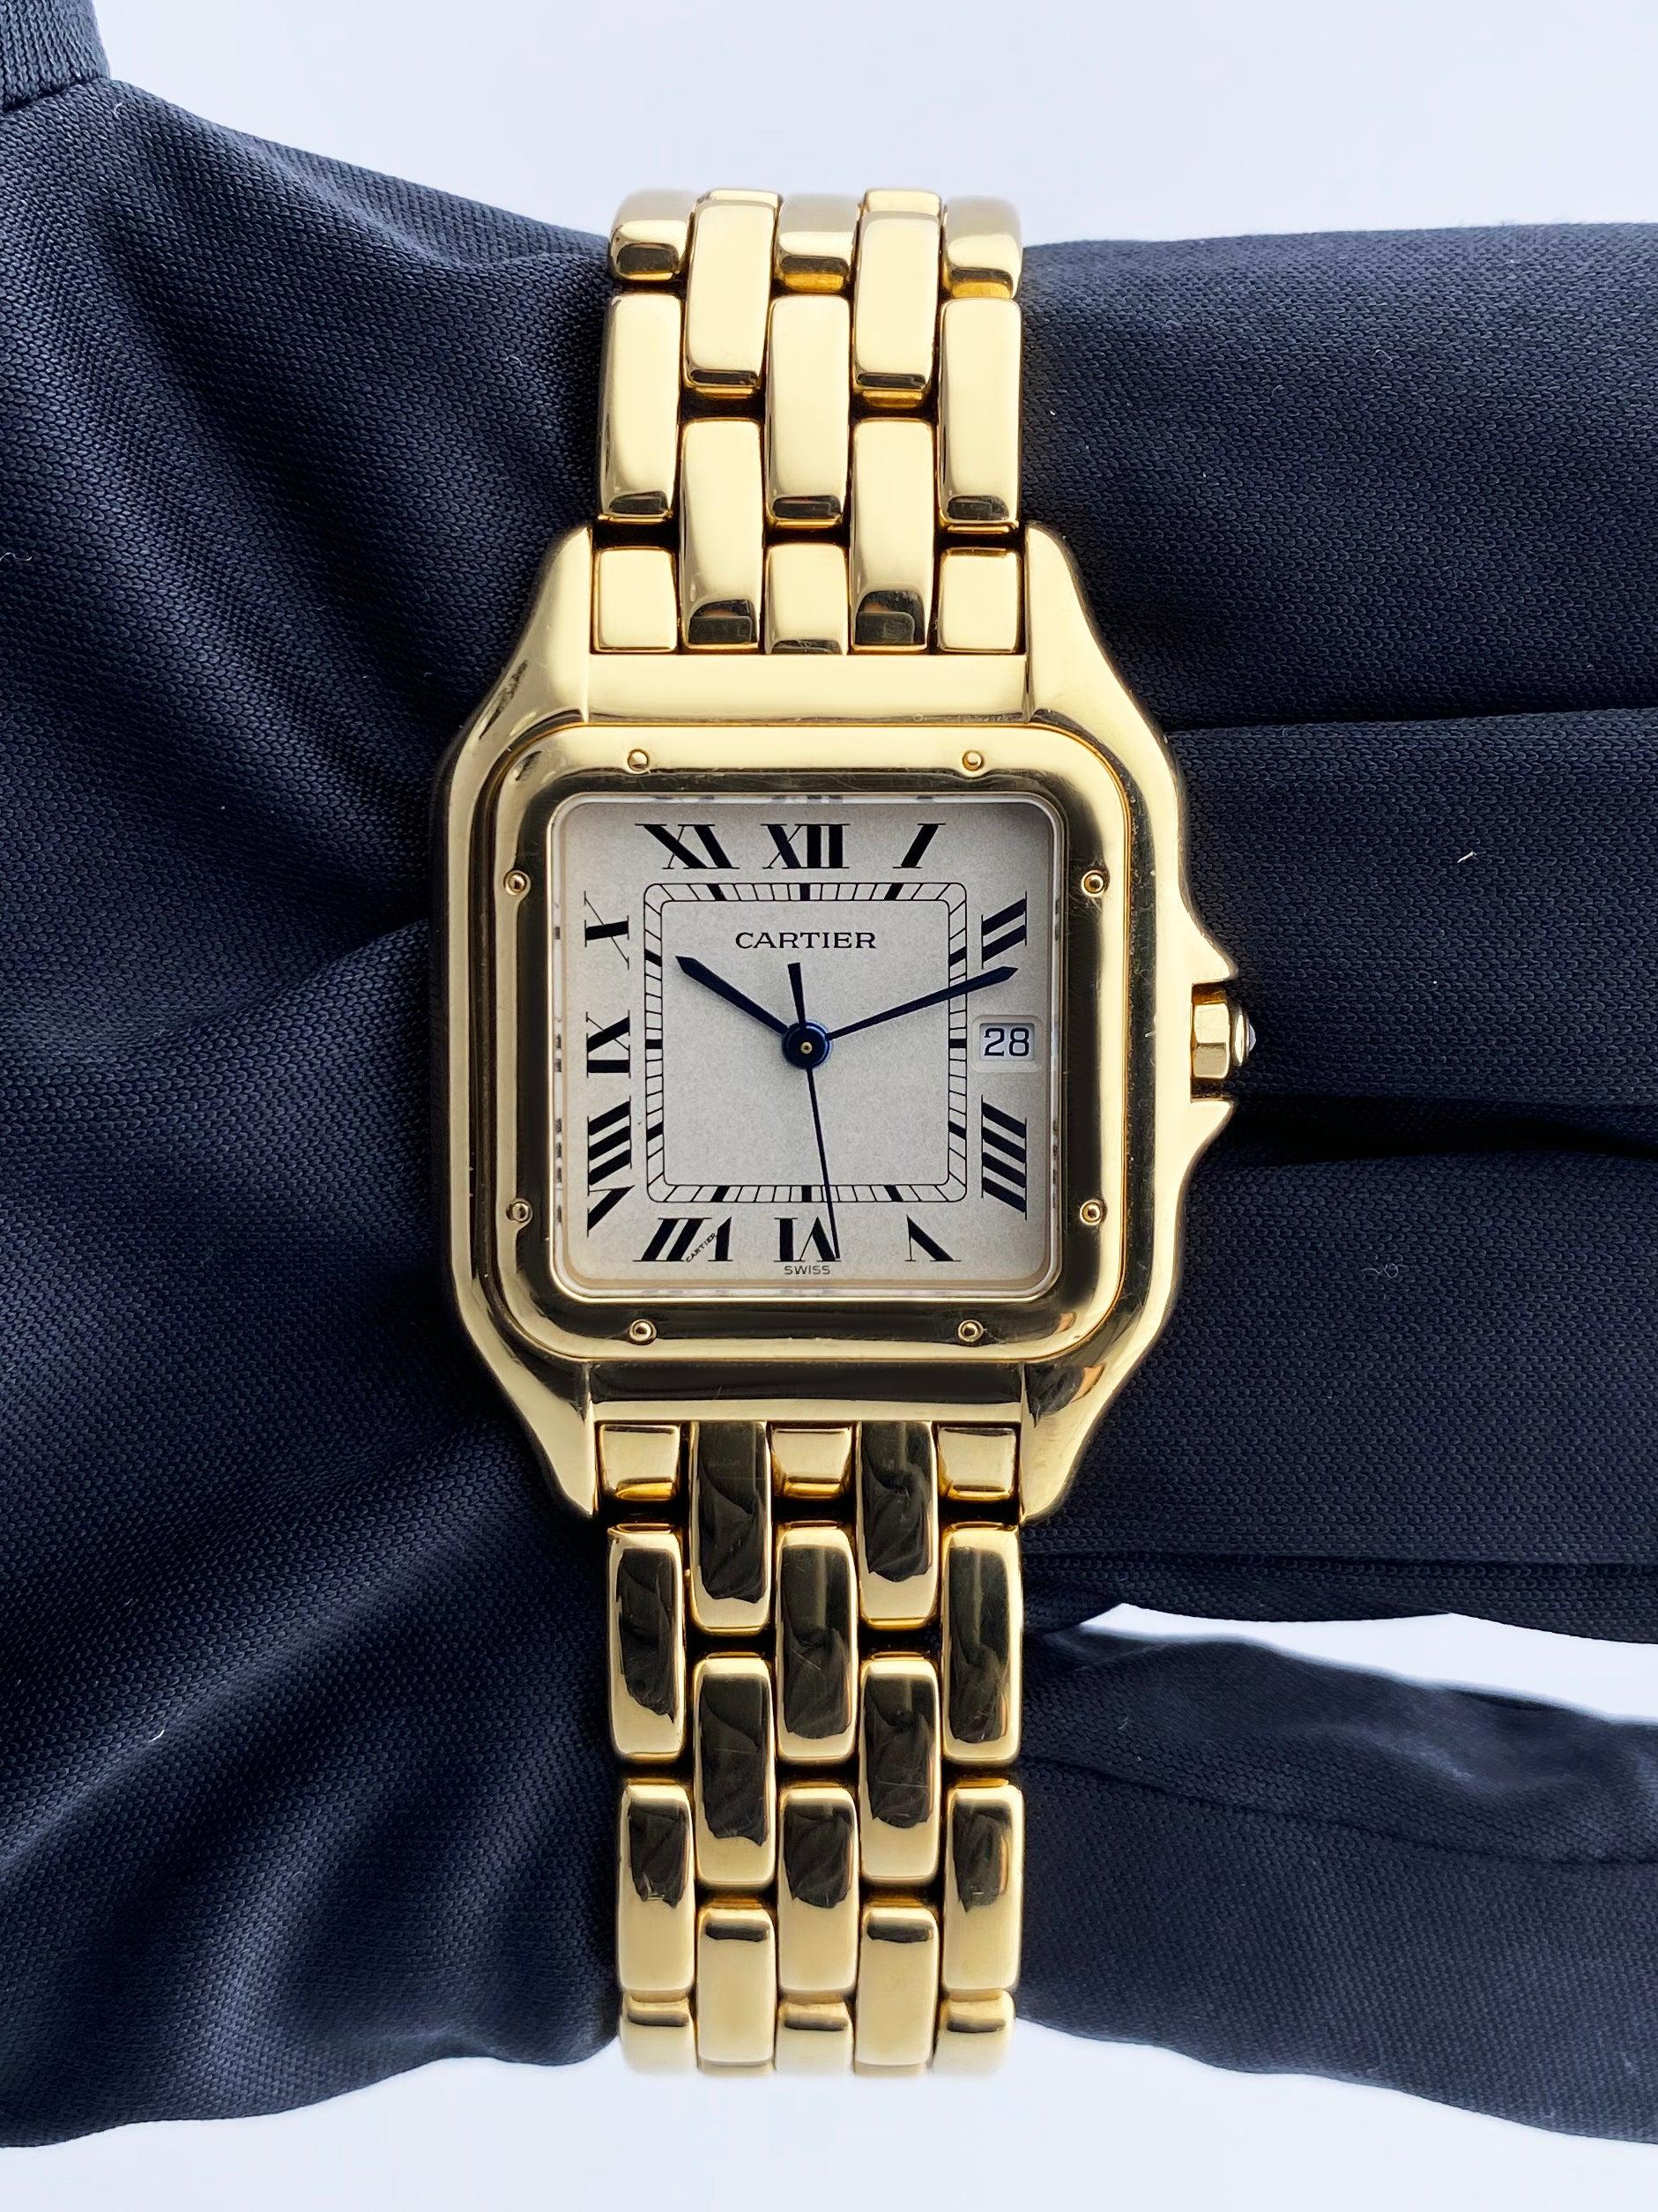 
Cartier Panthere Jumbo Mens Watch. 30mm 18K yellow case with 18K yellow gold bezel. Off-white dial with blue steel hands and black Roman numeral hour markers. Date display at the 3 o'clock position. Minute markers on the inner dial. 18K yellow